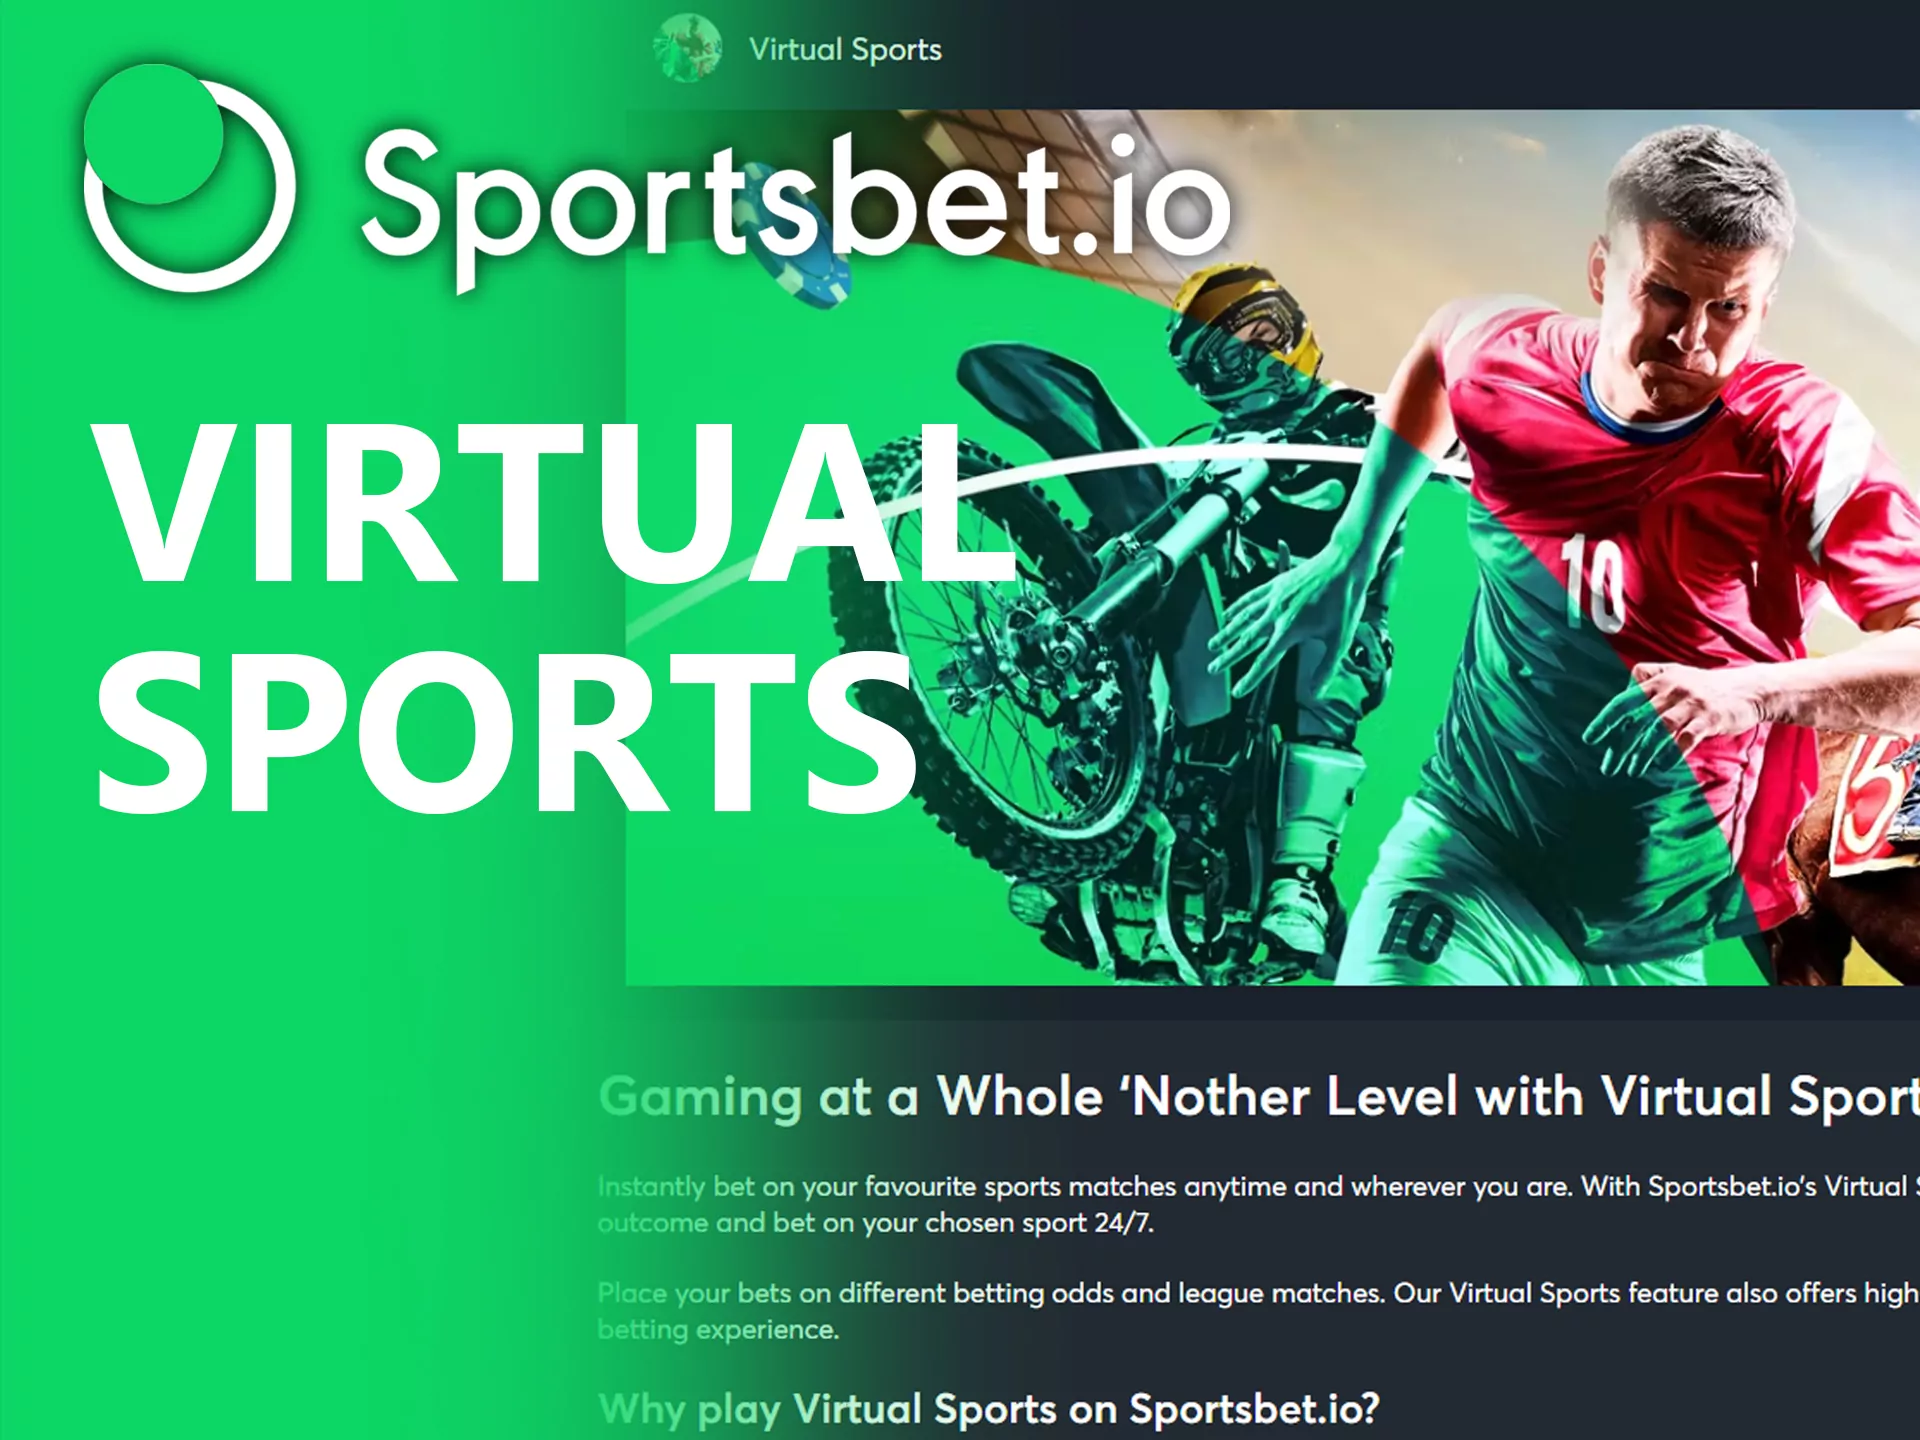 You can also bet on virtual sports at Sportsbet.